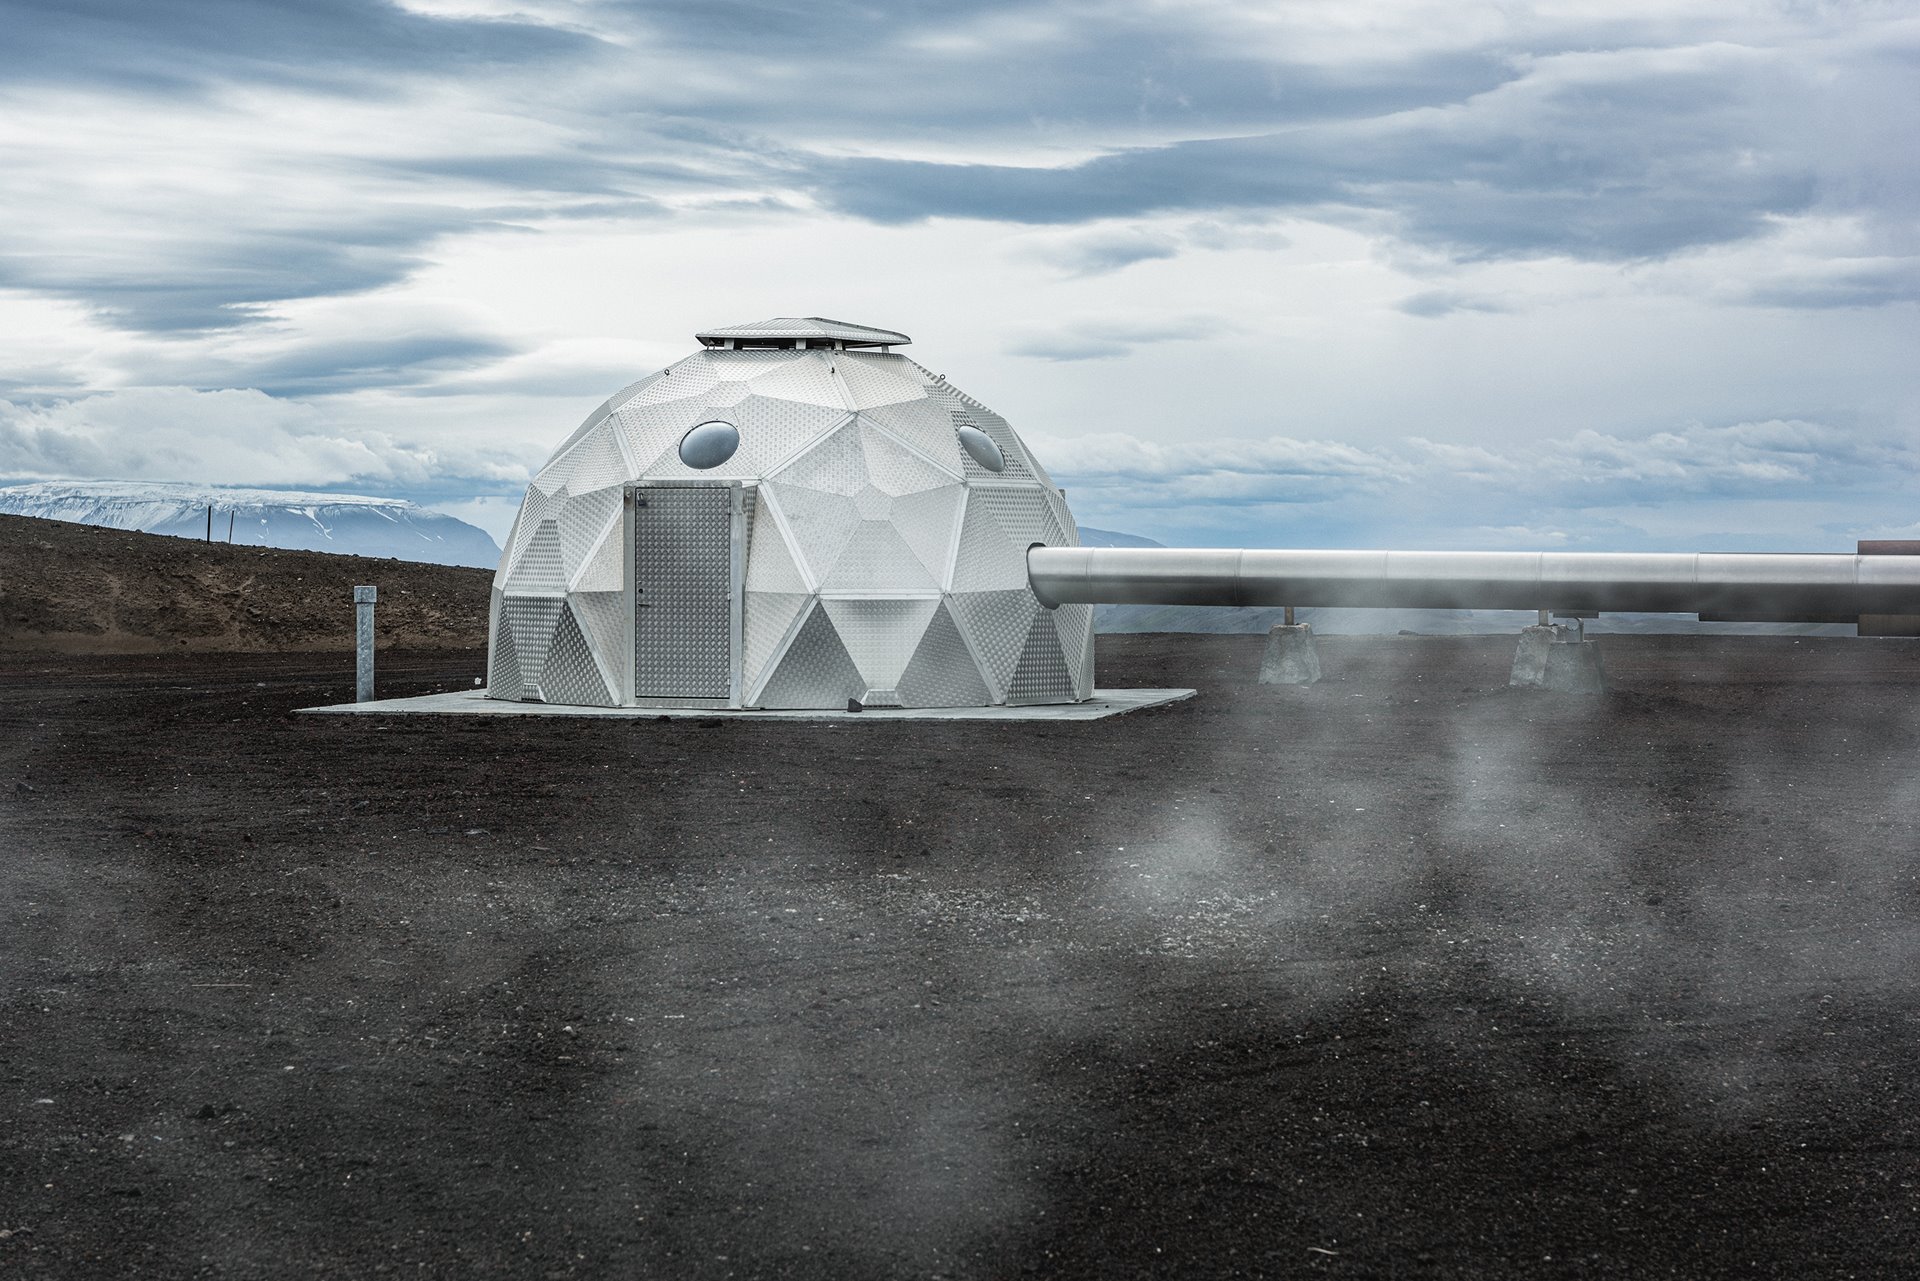 A geodesic dome covers the injection well of a geothermal power plant, in Hellisheiði, Iceland.&nbsp;<br />
<br />
The plant captures geothermal energy from the volcanic Hengill mountain. Geothermal power plants draw fluids from underground reservoirs to the surface to produce steam, which then drives turbines to generate electricity. The process is not emissions-free, as the remaining fluids contain harmful condensates, but the plant injects these back into deep bedrock, where the CO2 can turn rapidly into minerals. The dome covers the borehole and equipment, reducing the visual impact on the environment. By January 2022, this plant had fixed over 100,000 tonnes of CO2 in this way. In cases where carbon emissions cannot be avoided, such carbon fixing can be a valid alternative, although critics say that carbon-capturing technologies detract from the more &nbsp;pressing need to reduce carbon emissions in the first place.&nbsp;